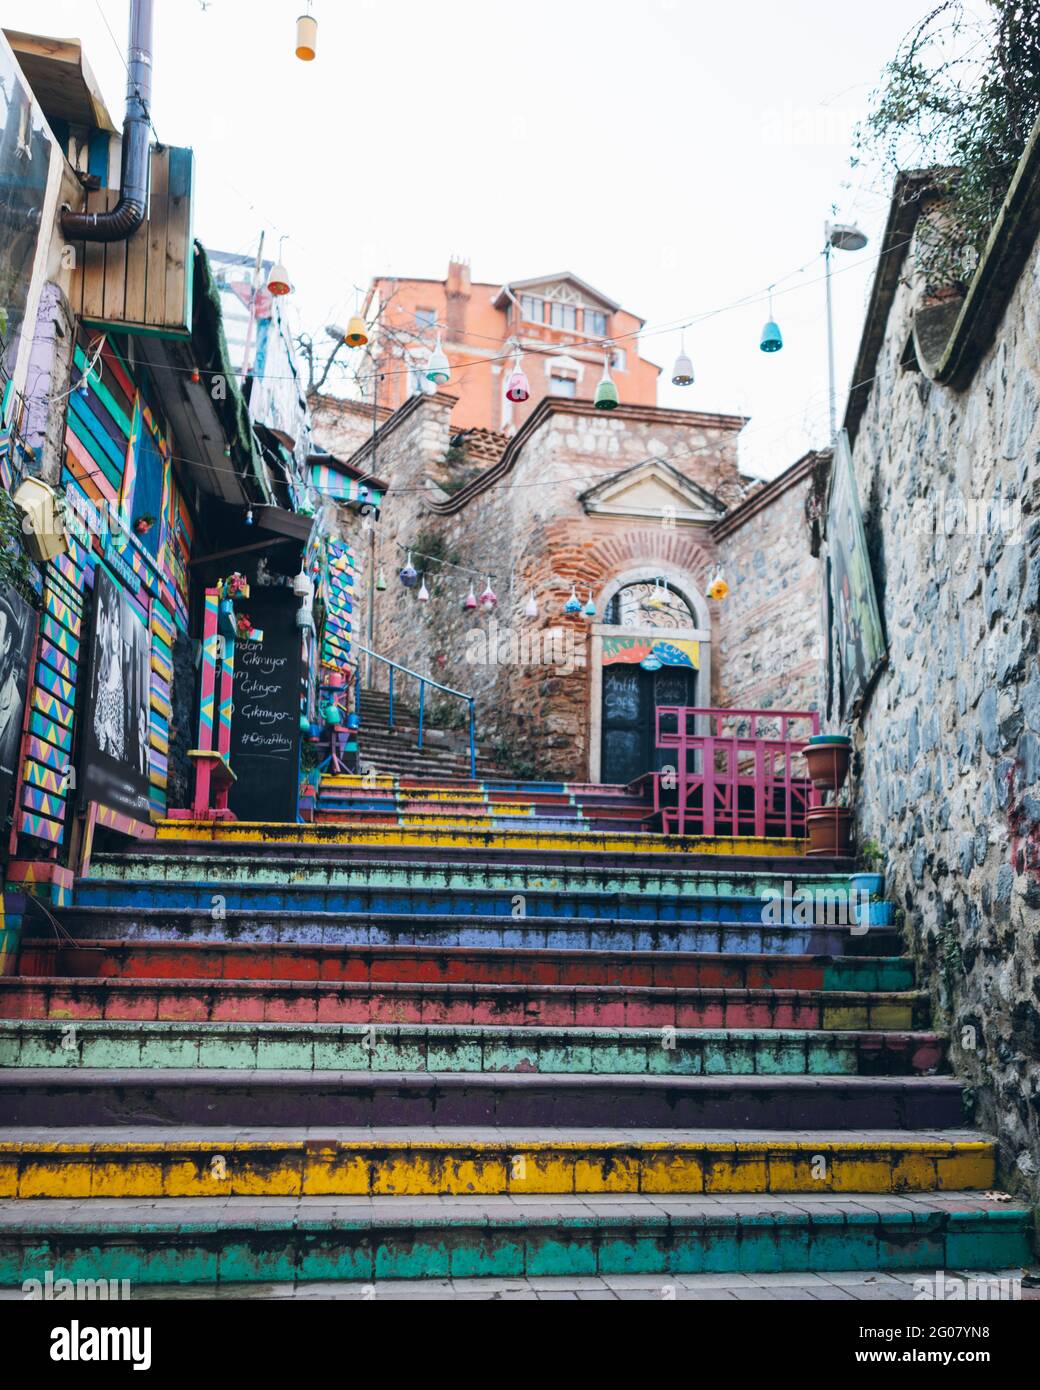 Shabby multicolored stairs under garlands near aged stone buildings on town street in Turkey Stock Photo